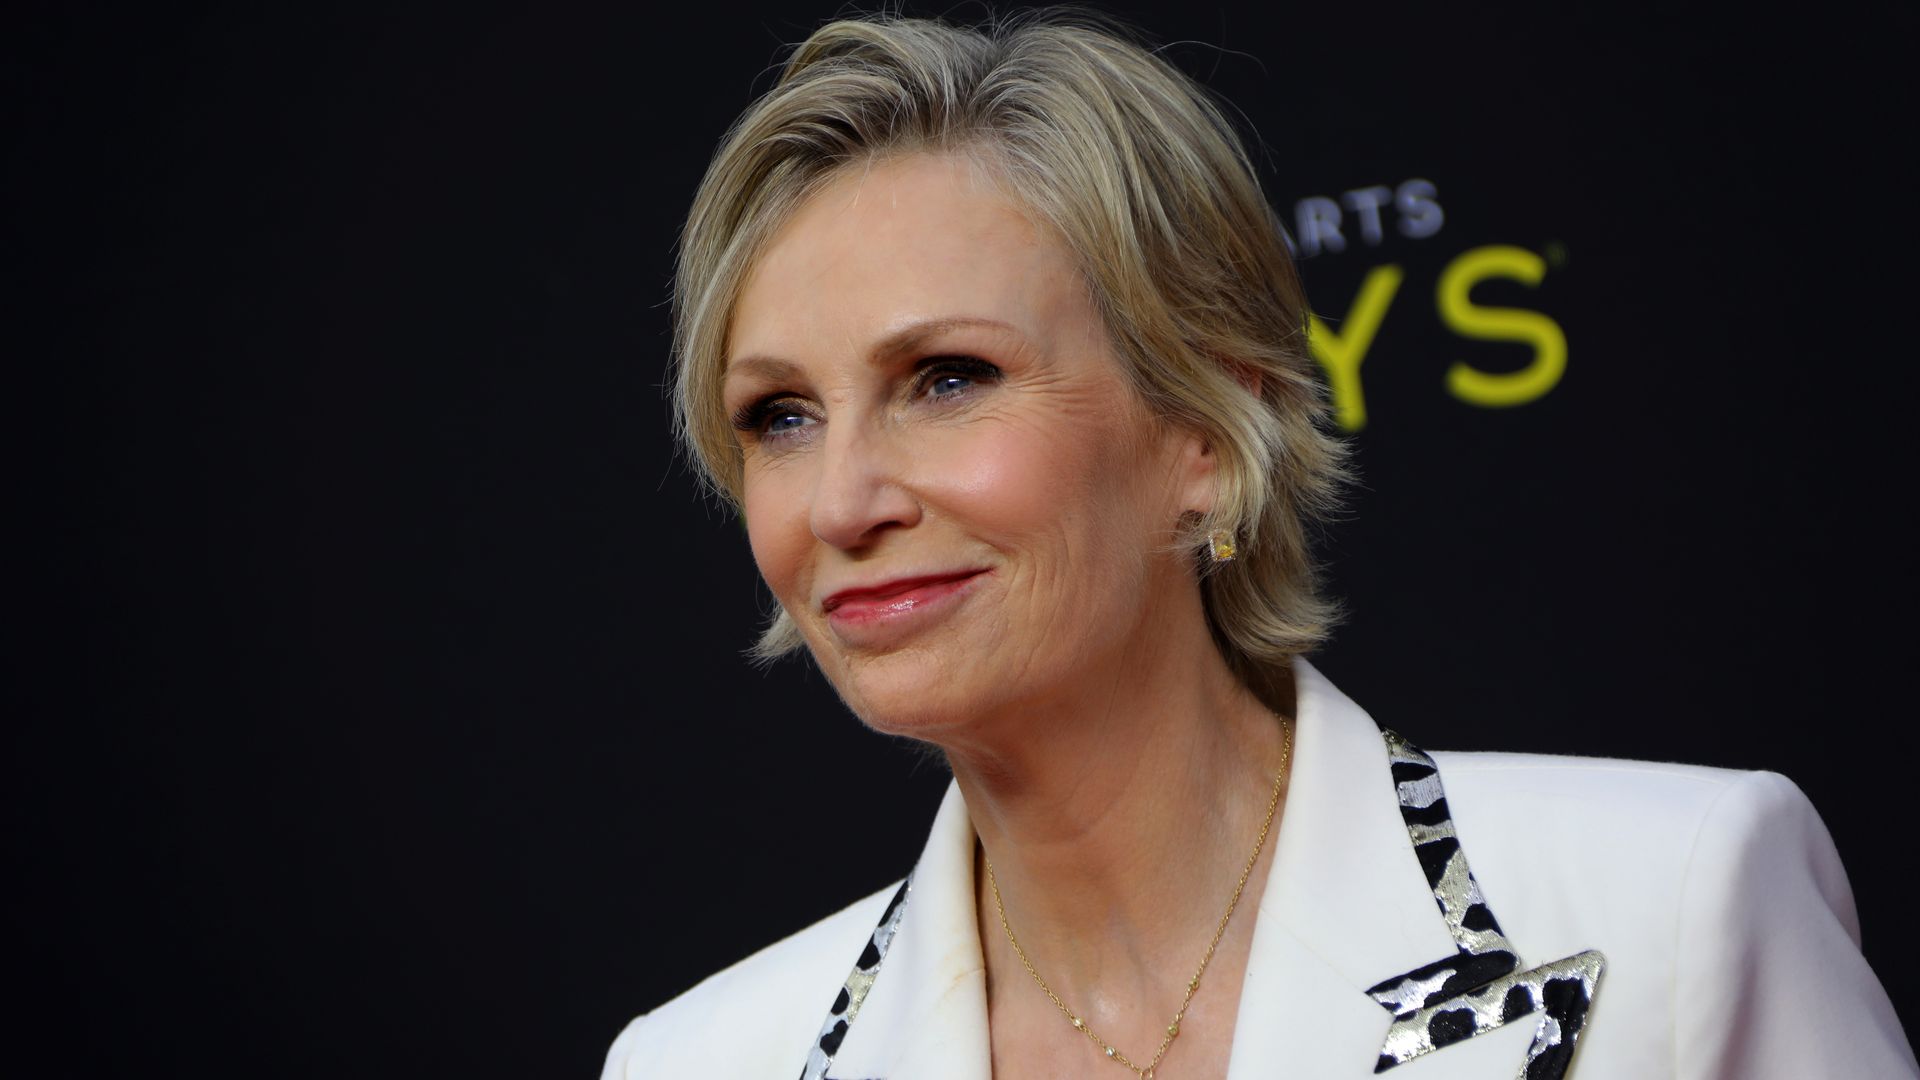 Jane Lynch at Emmys poses on the red carpet